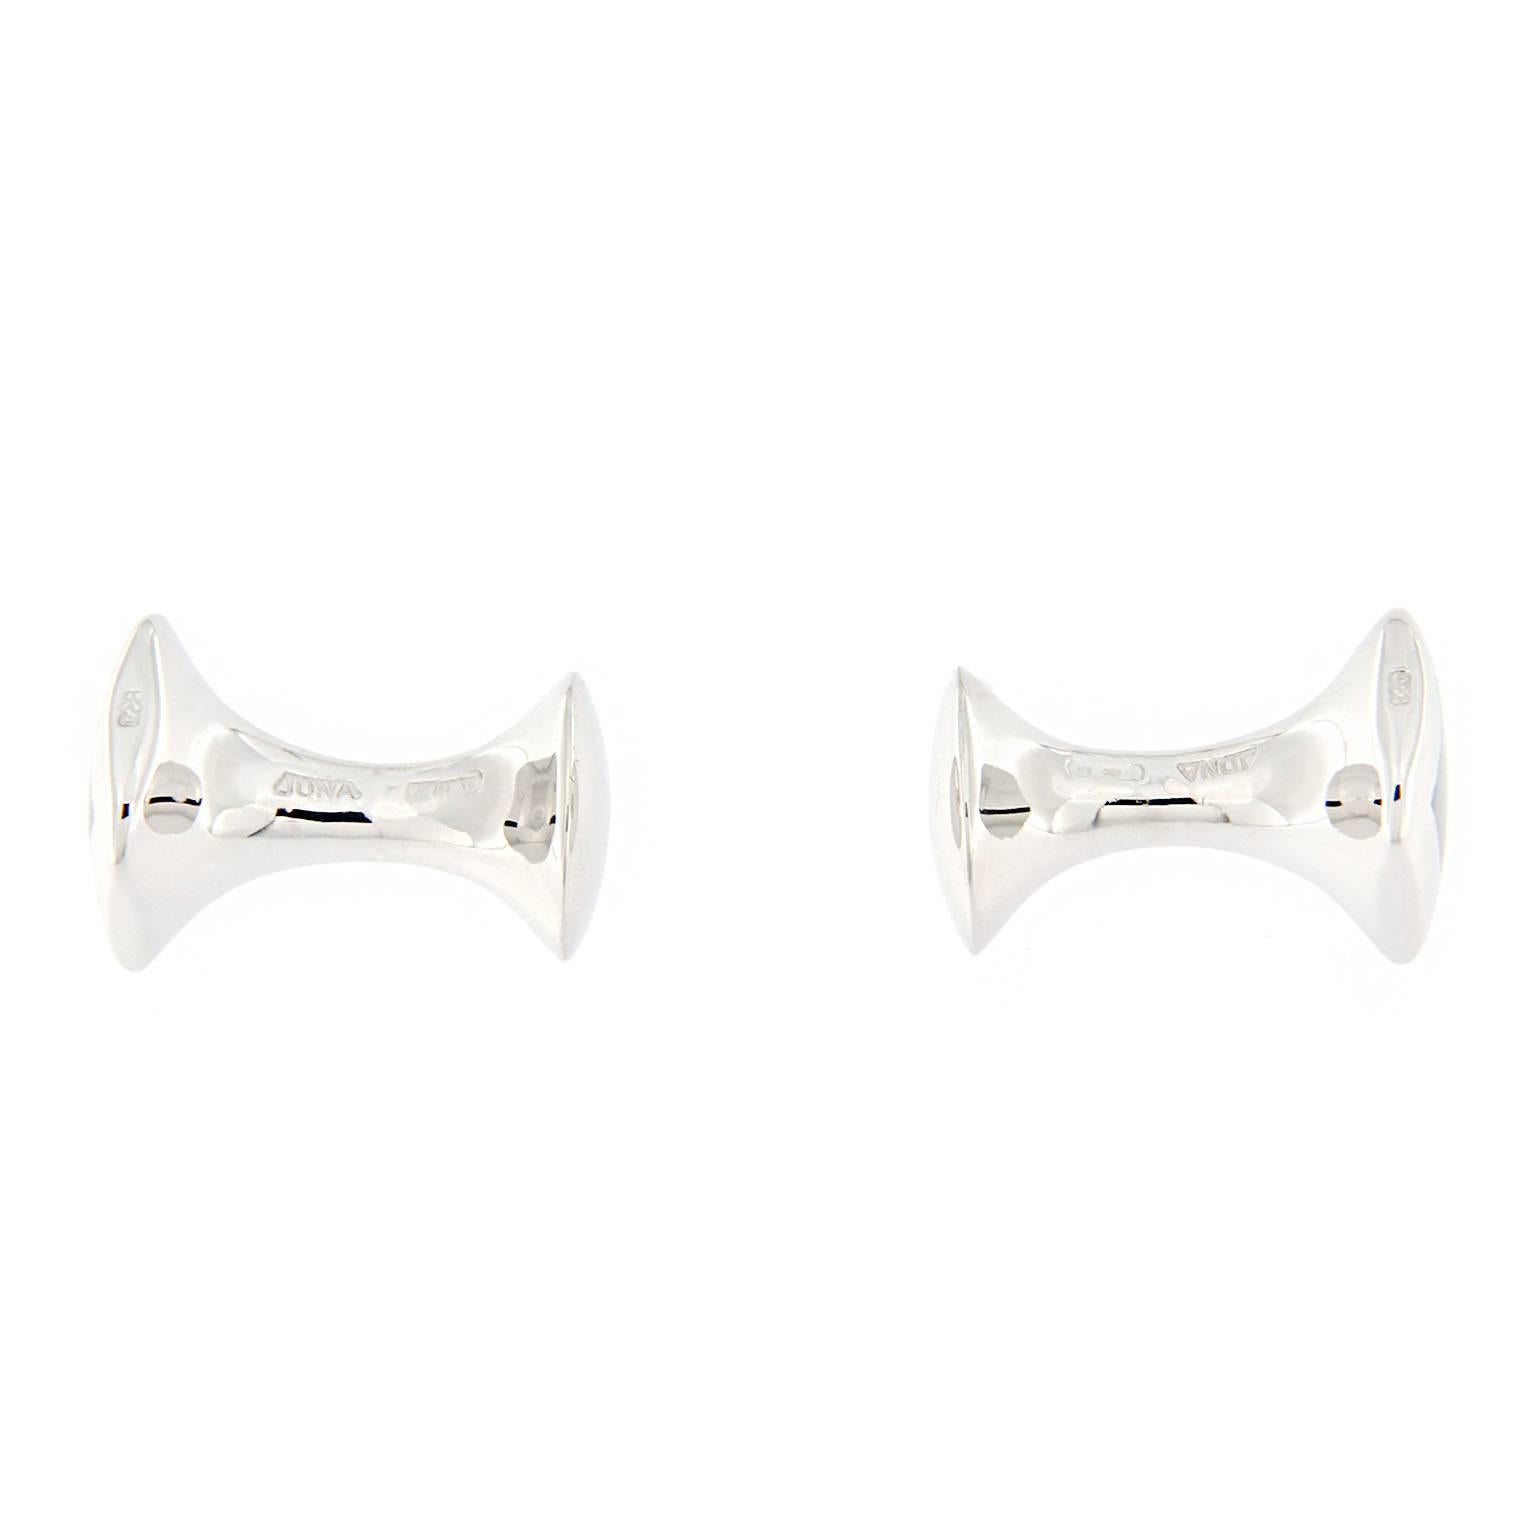 Jona design collection, hand crafted in Italy, sterling silver cufflinks. Dimensions: 0.47